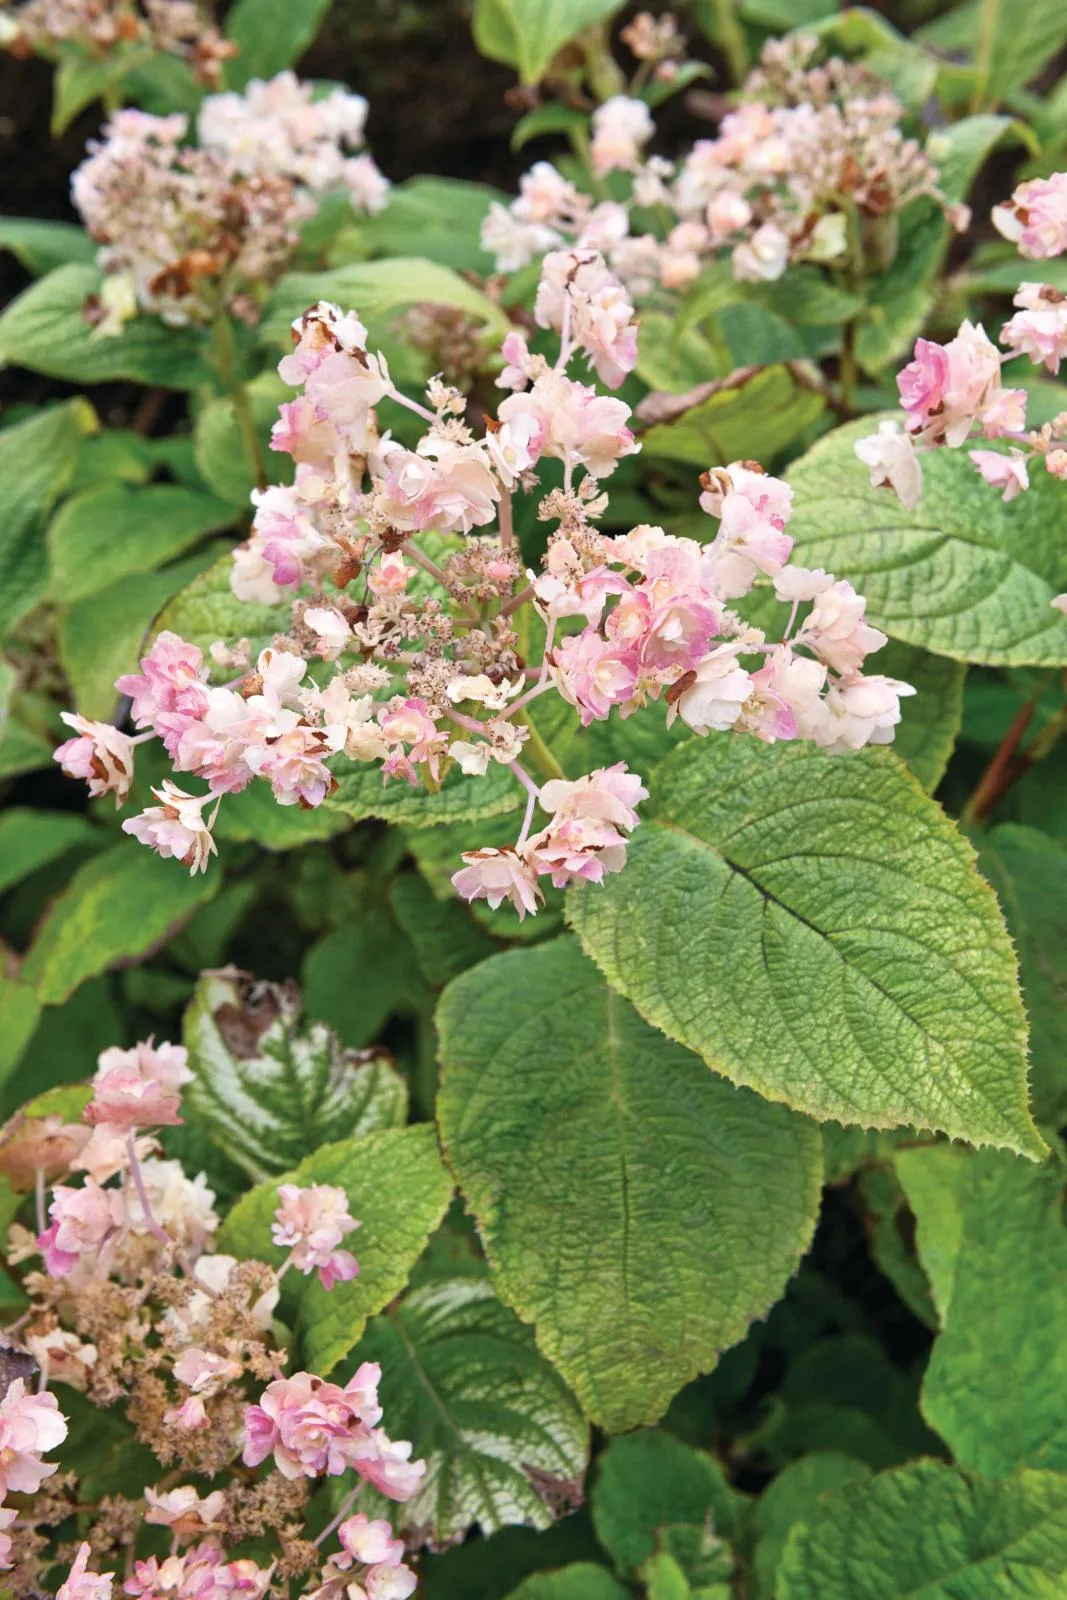 Hydrangea involucrata ‘Hortensis’ is a lovely, low-growing shrub with branched stems and soft-green leaves with loose heads of pinkish, fertile florets and double creamy-pink,